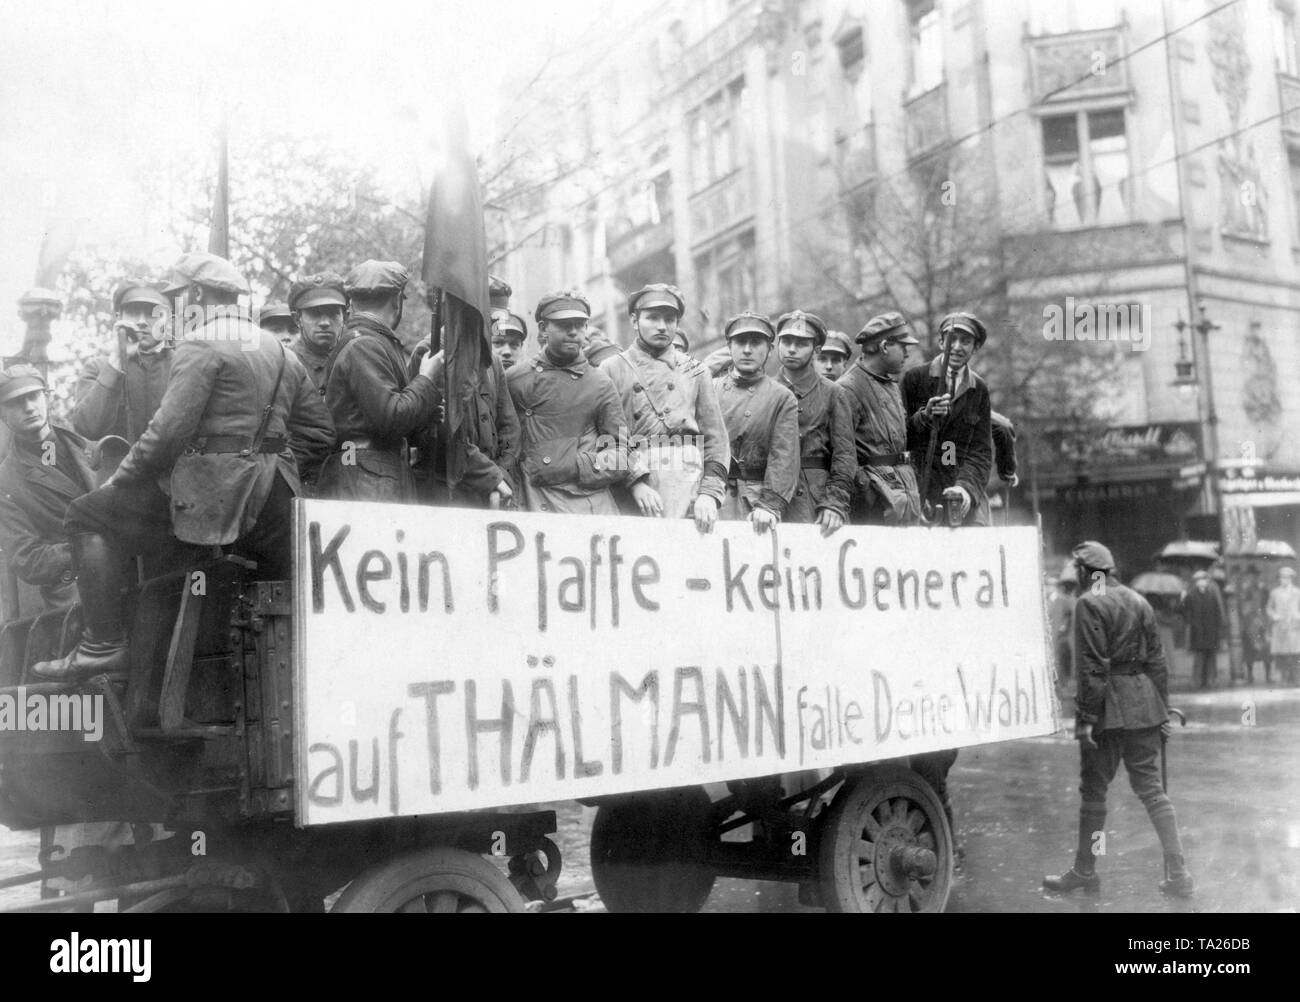 The KPD promoted its candidate, Ernst Thaelmann, for the office of the president of the Reich with the slogan 'No priests - no generals, vote for Thalmann'. The opponents were Wilhelm Marx for the Centre and former Field Marshal General, Paul von Hindenburg. Stock Photo